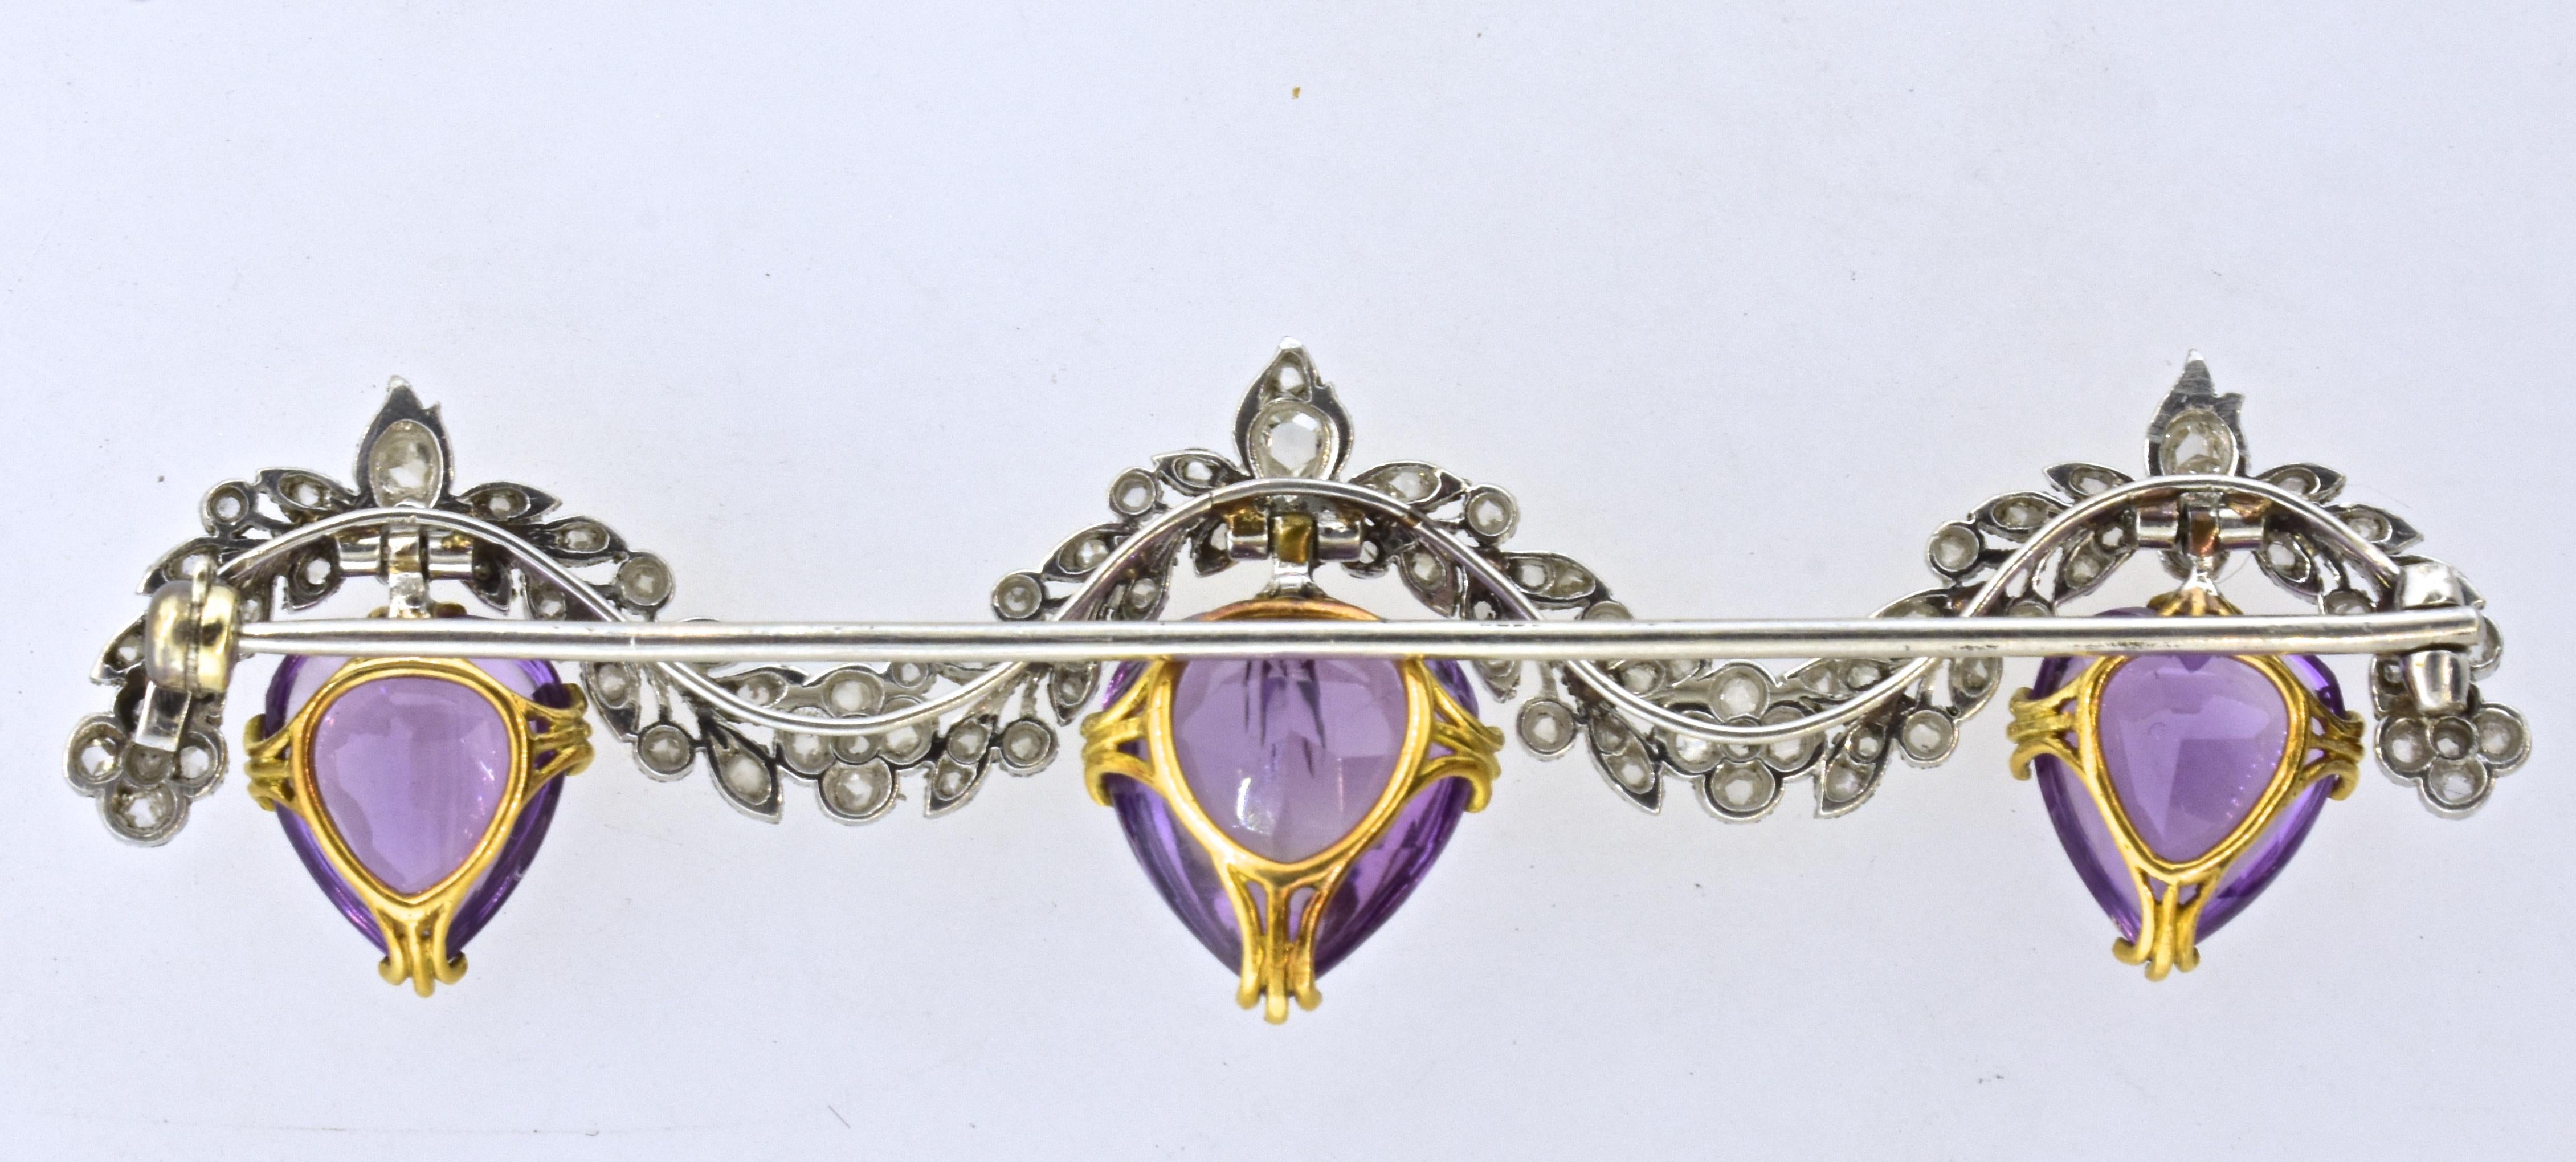 Women's or Men's Antique Brooch with Diamond and Amethyst Edwardian, circa 1910